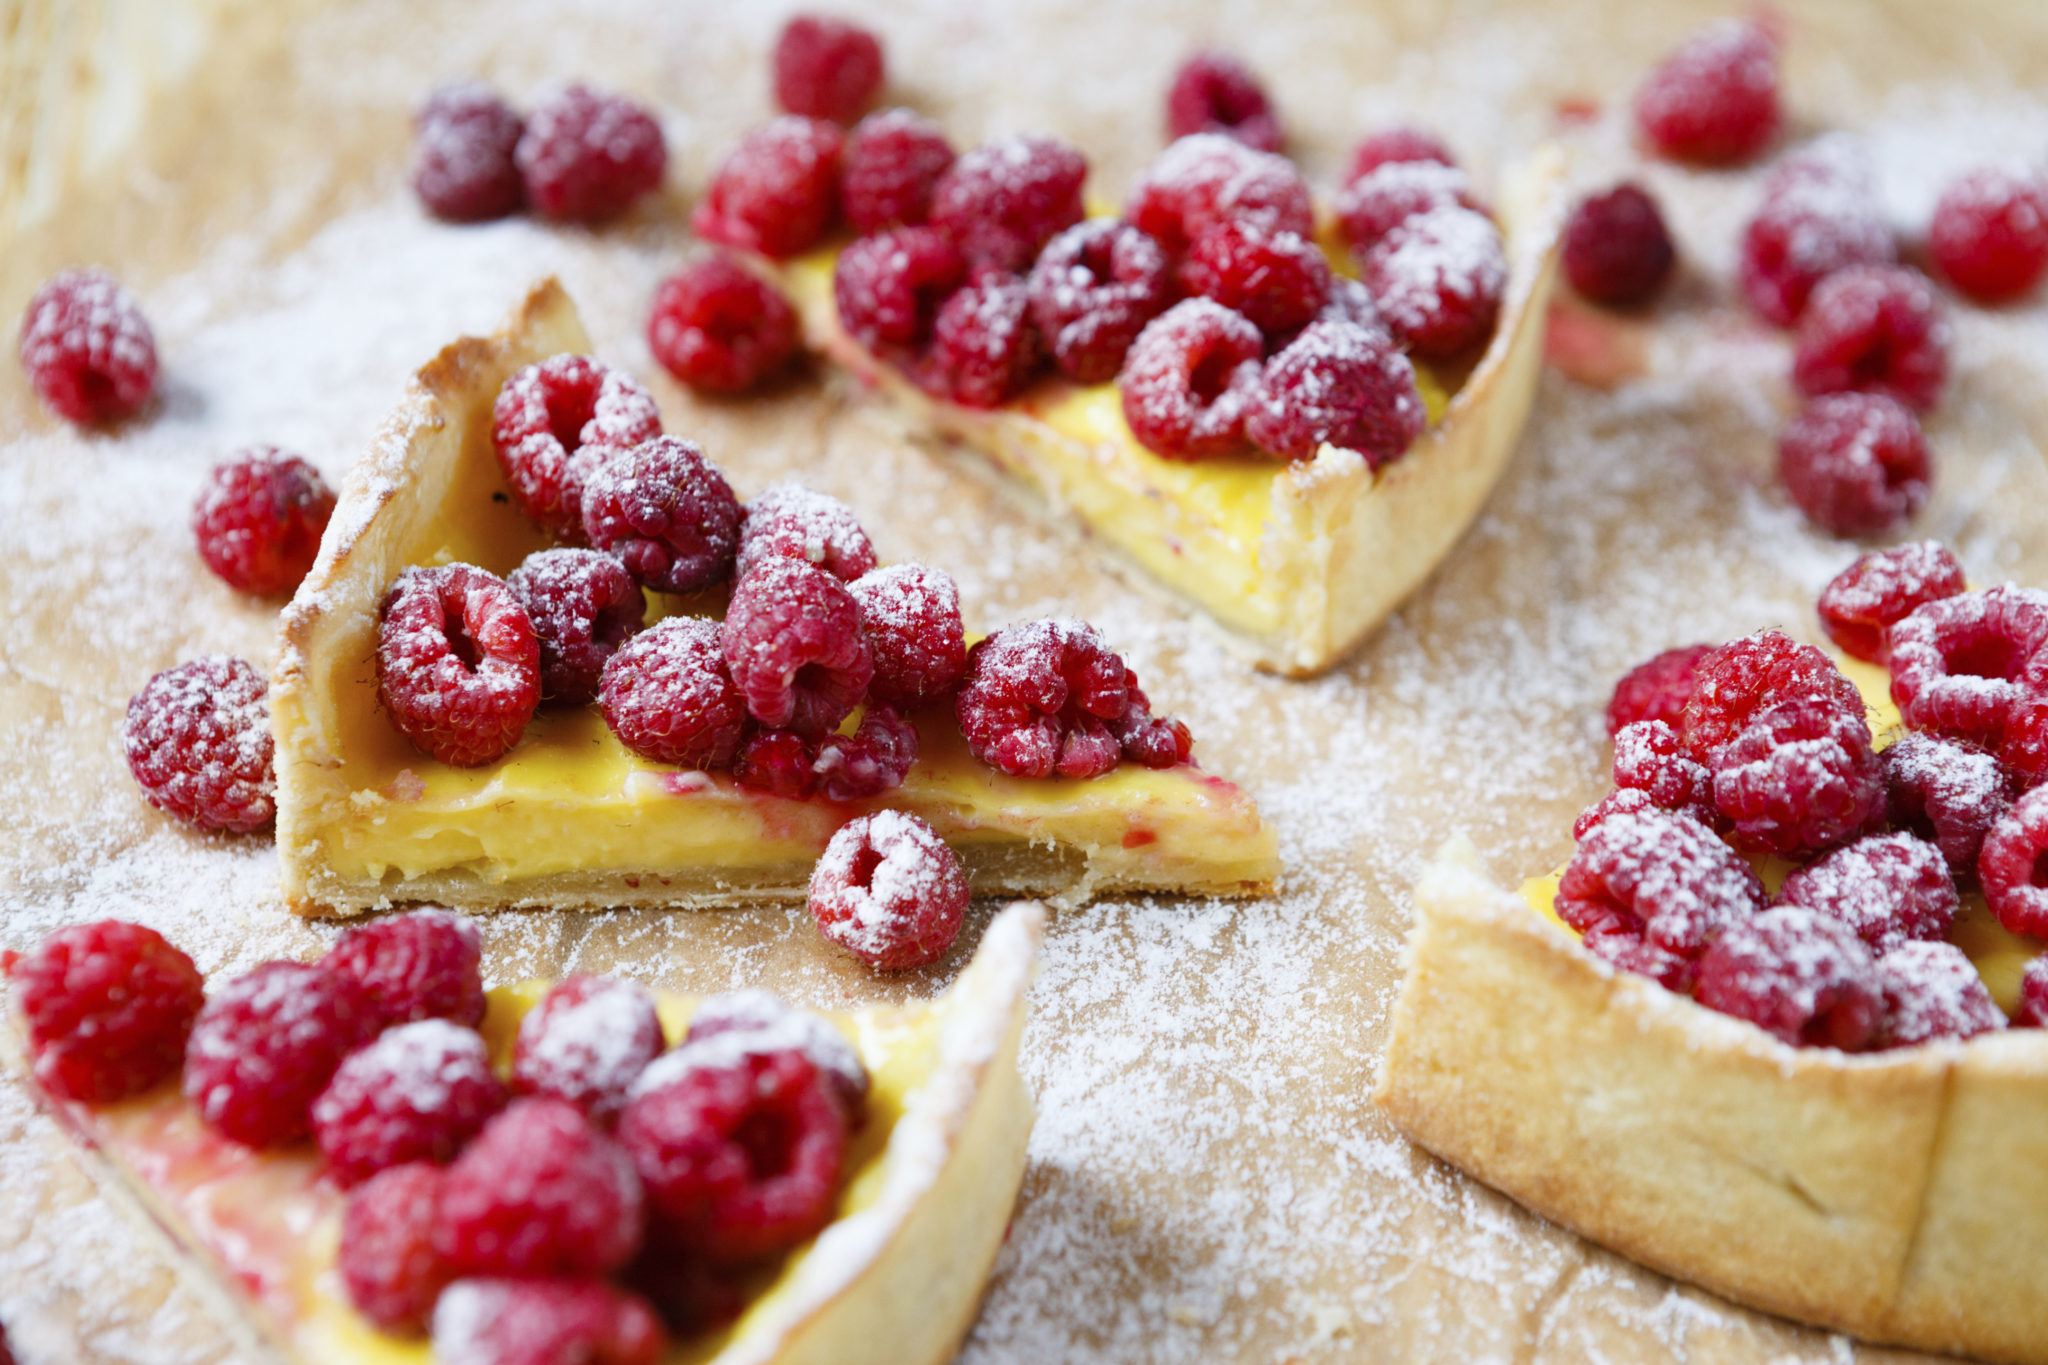 slices of cake with custard and raspberry